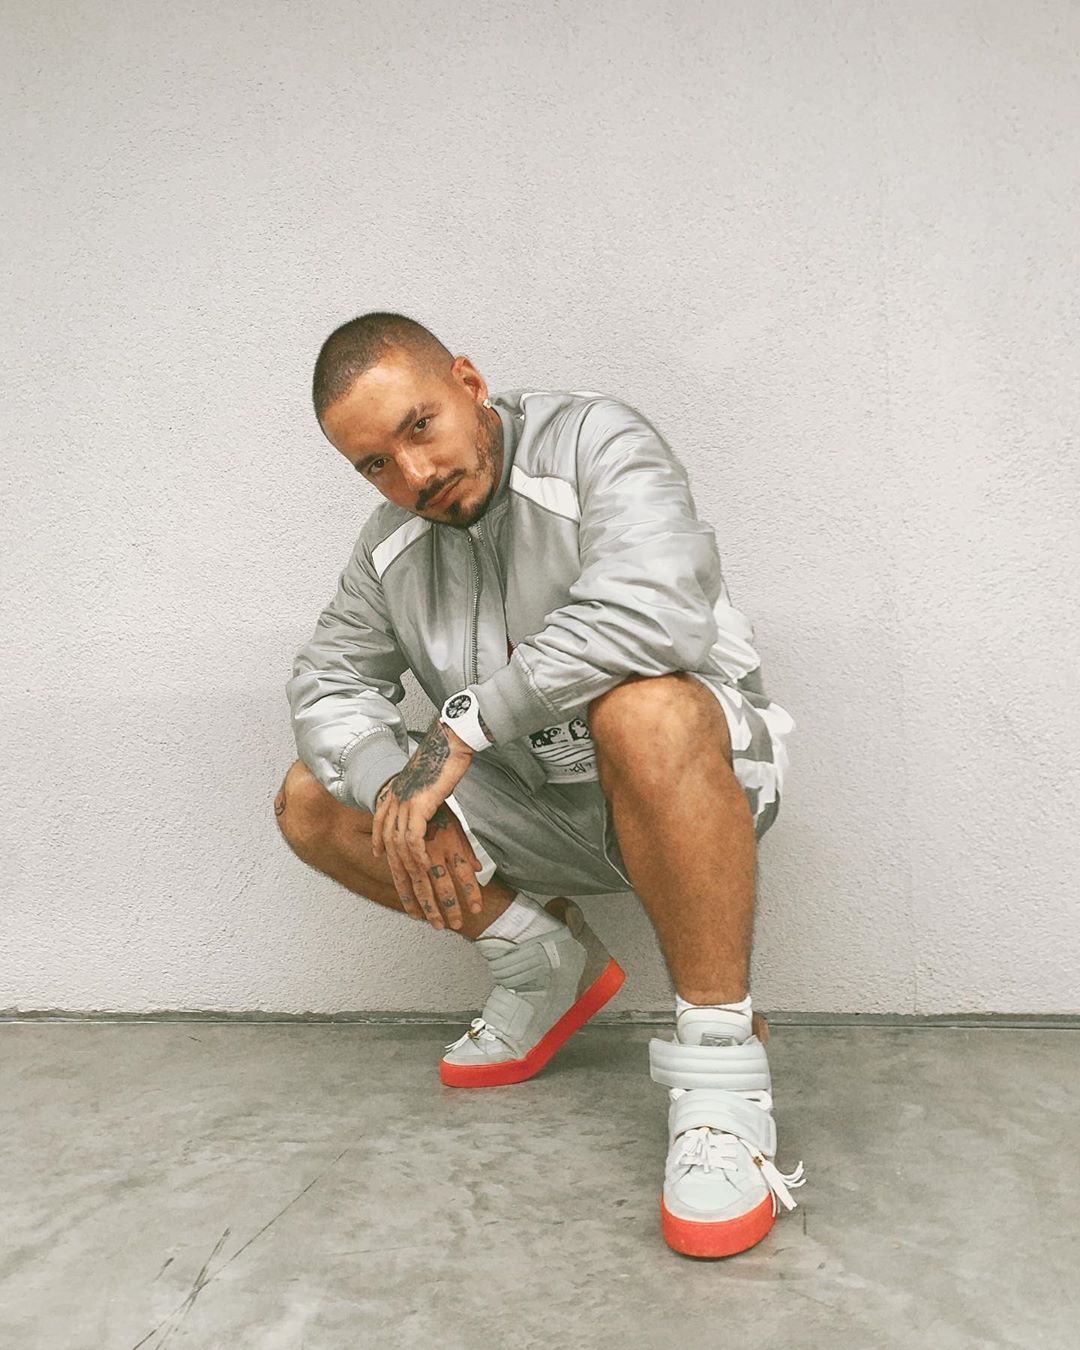 SPOTTED: J Balvin in Rare Louis Vuitton X Kanye West Sneakers